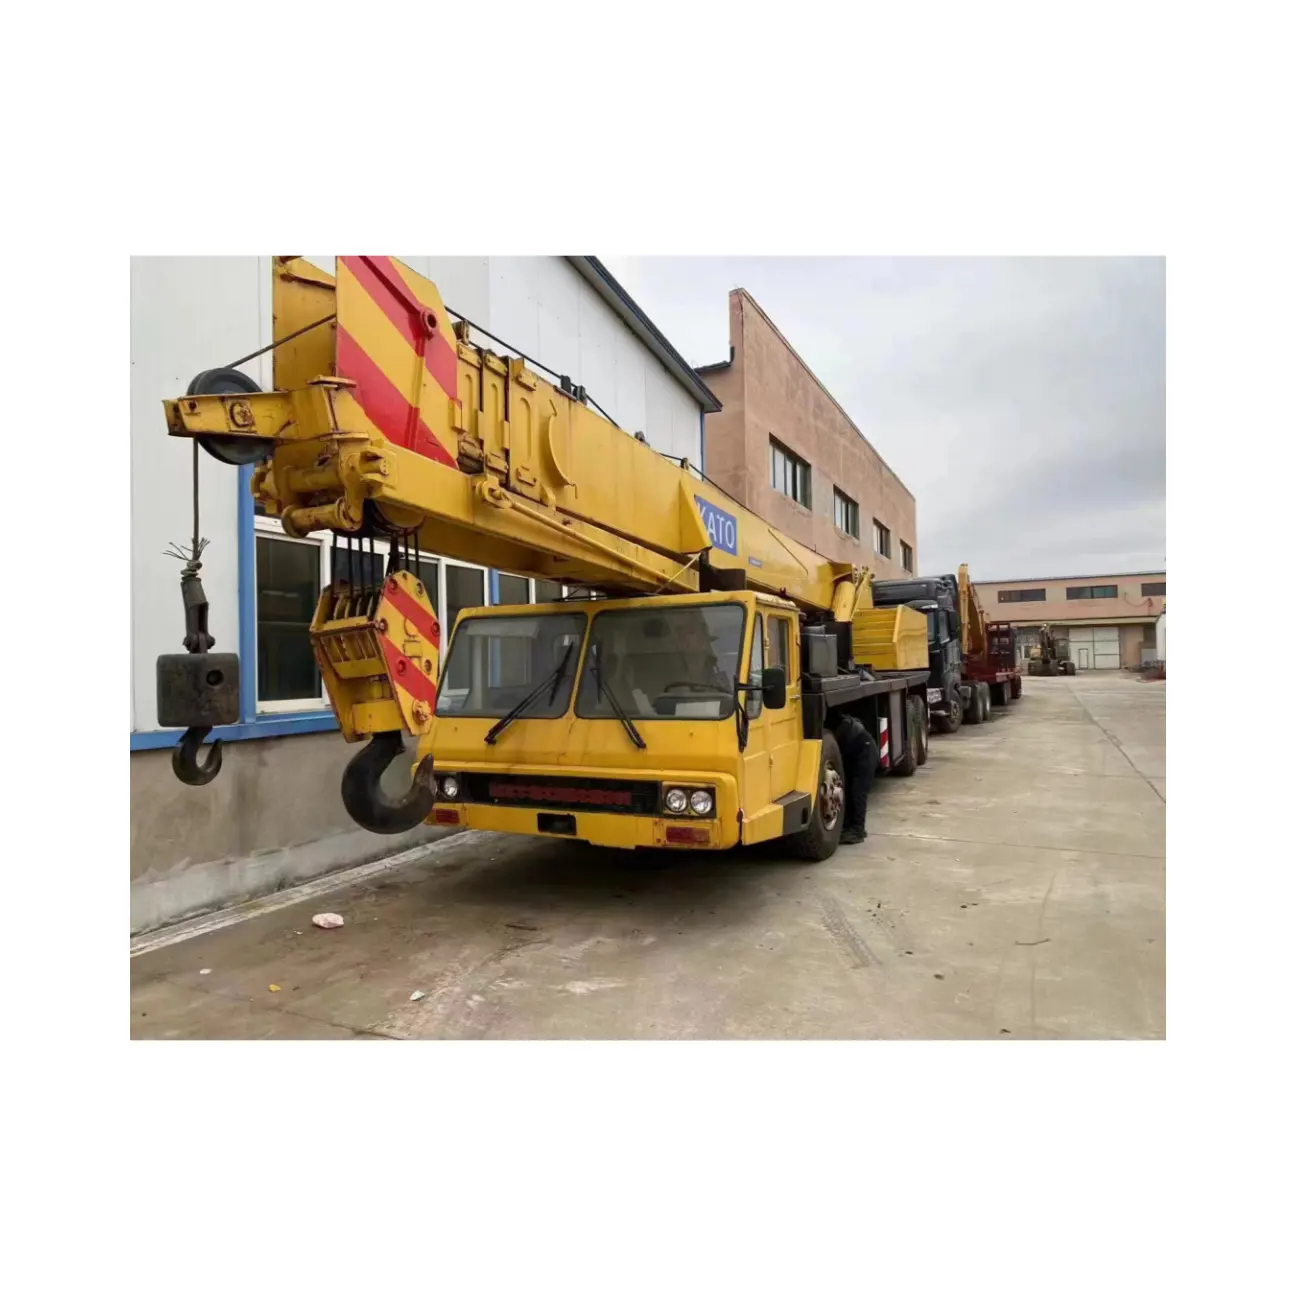 Japan original used 50 ton kato terrain crane with good condition and high quality kato truck crane for sale